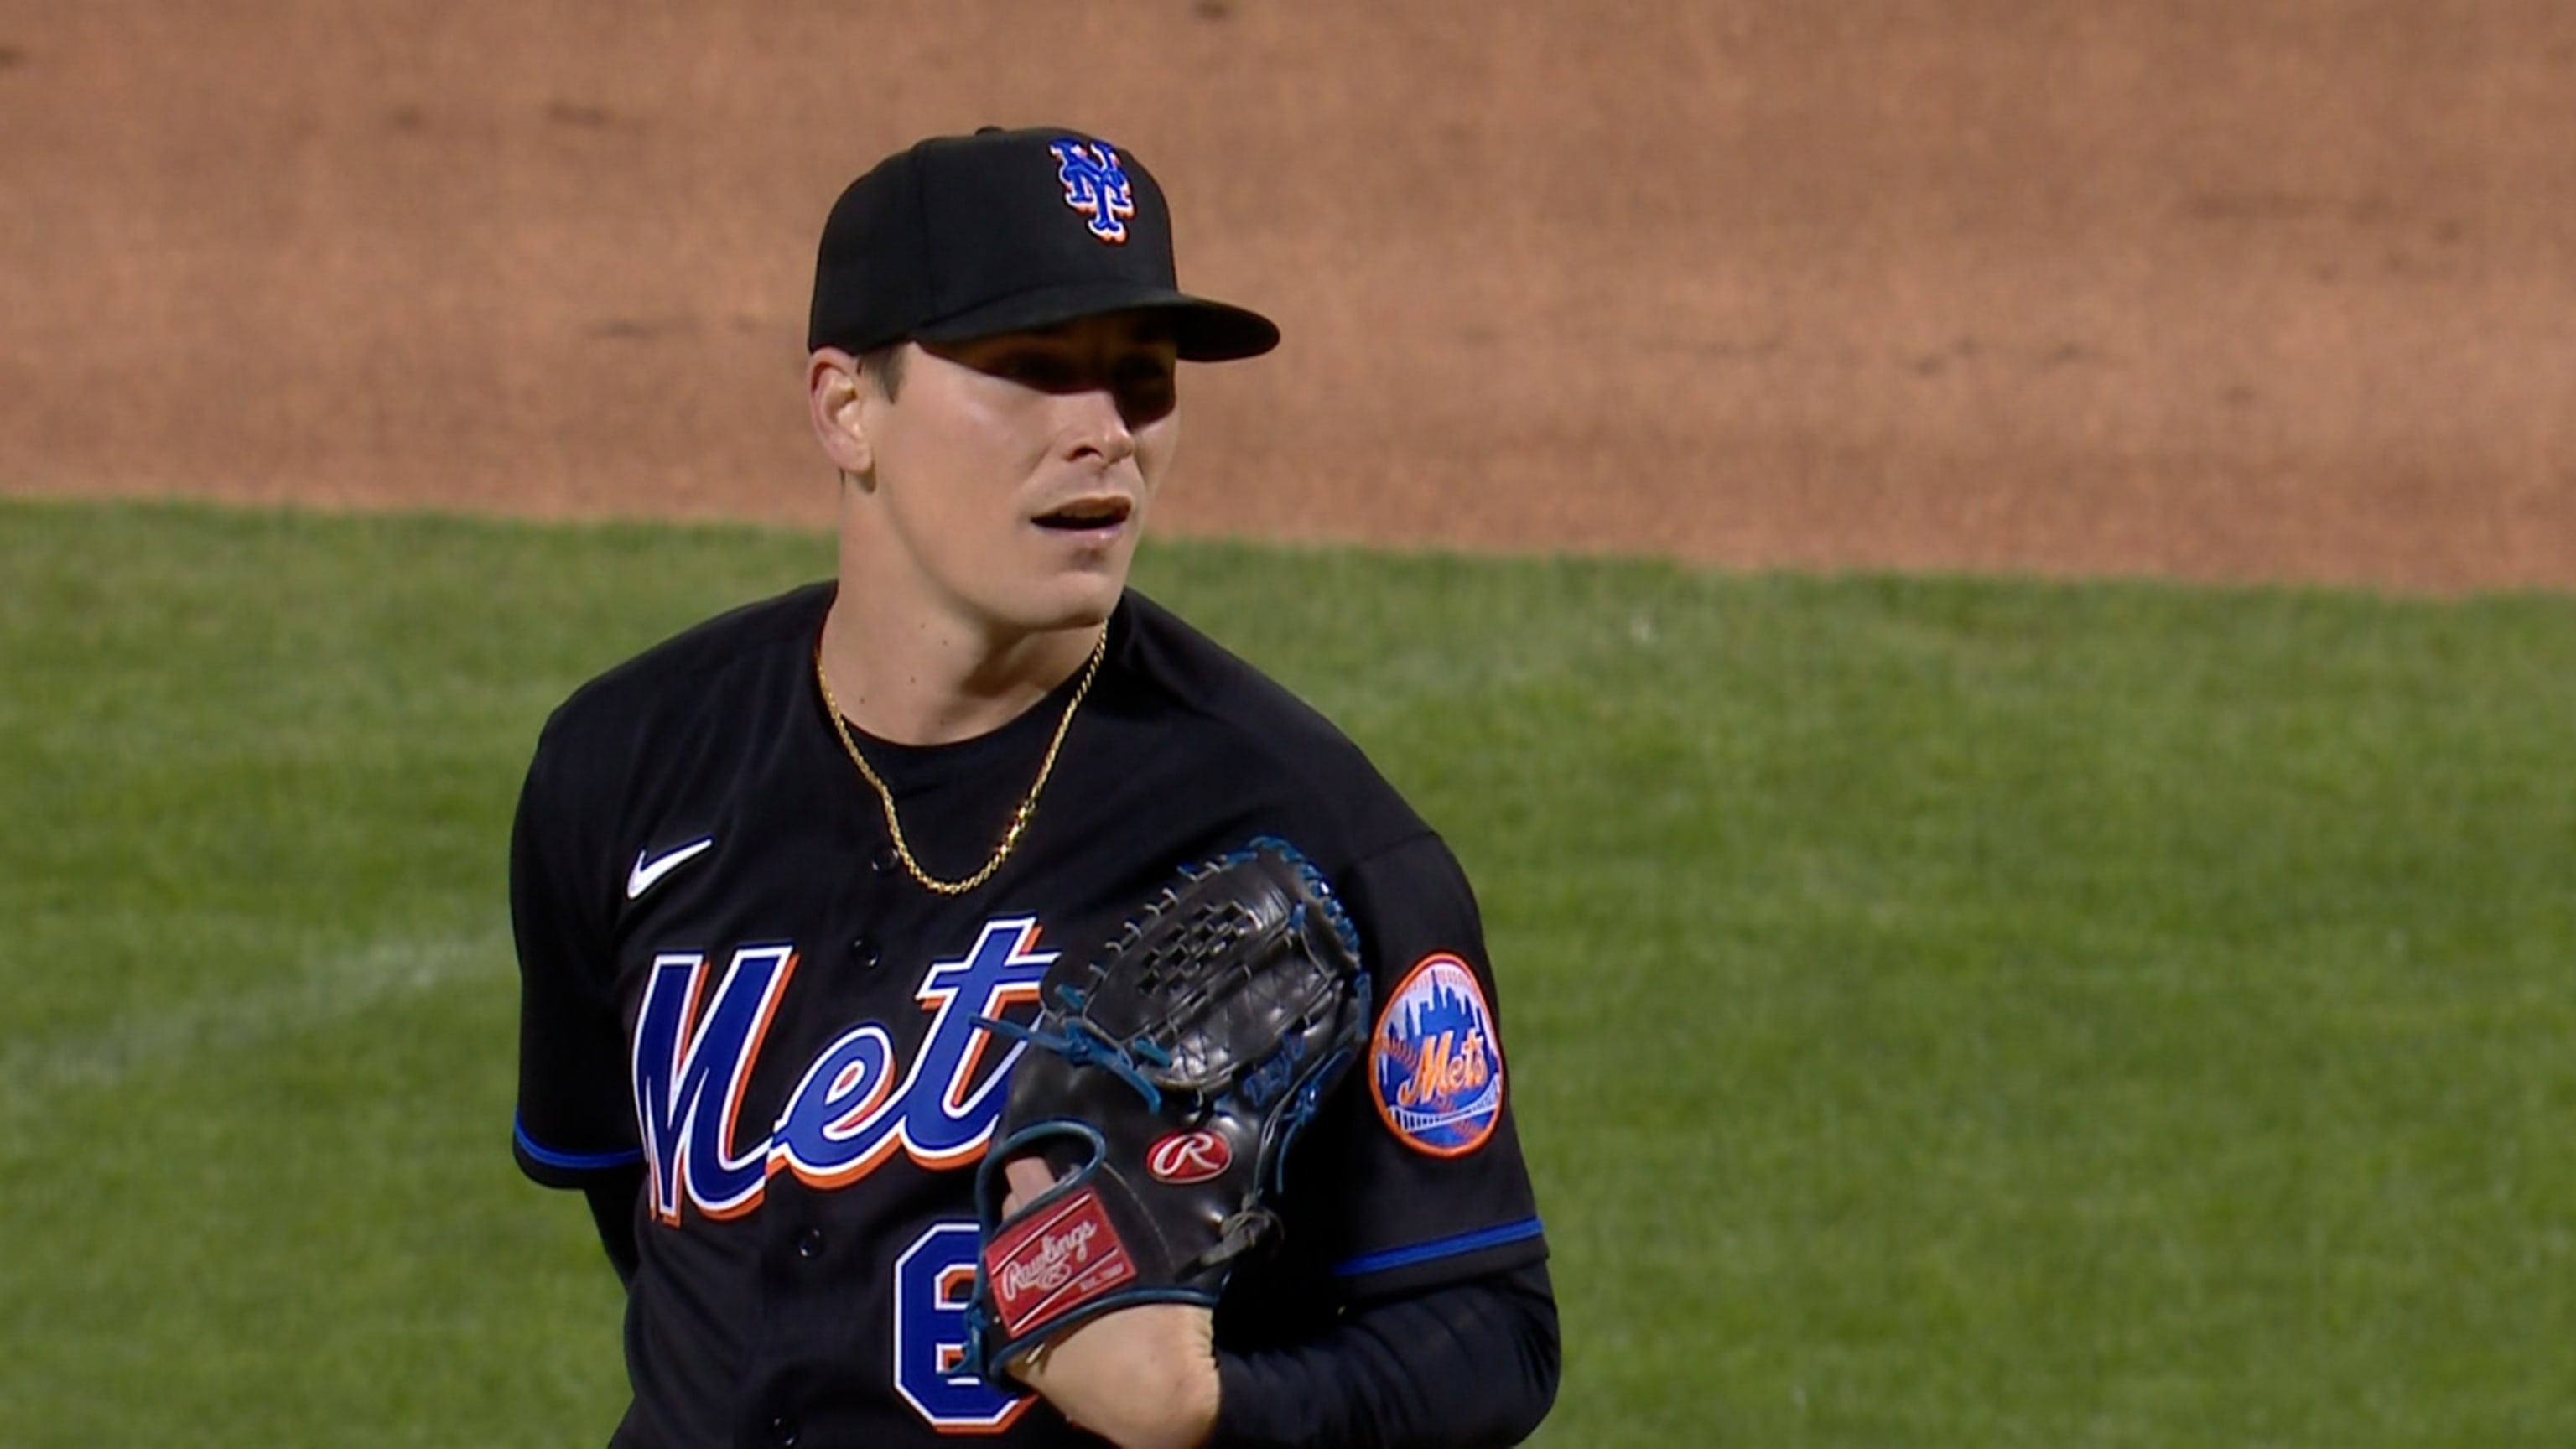 Five Mets pitchers combine for no-hitter vs. Phillies - NBC Sports